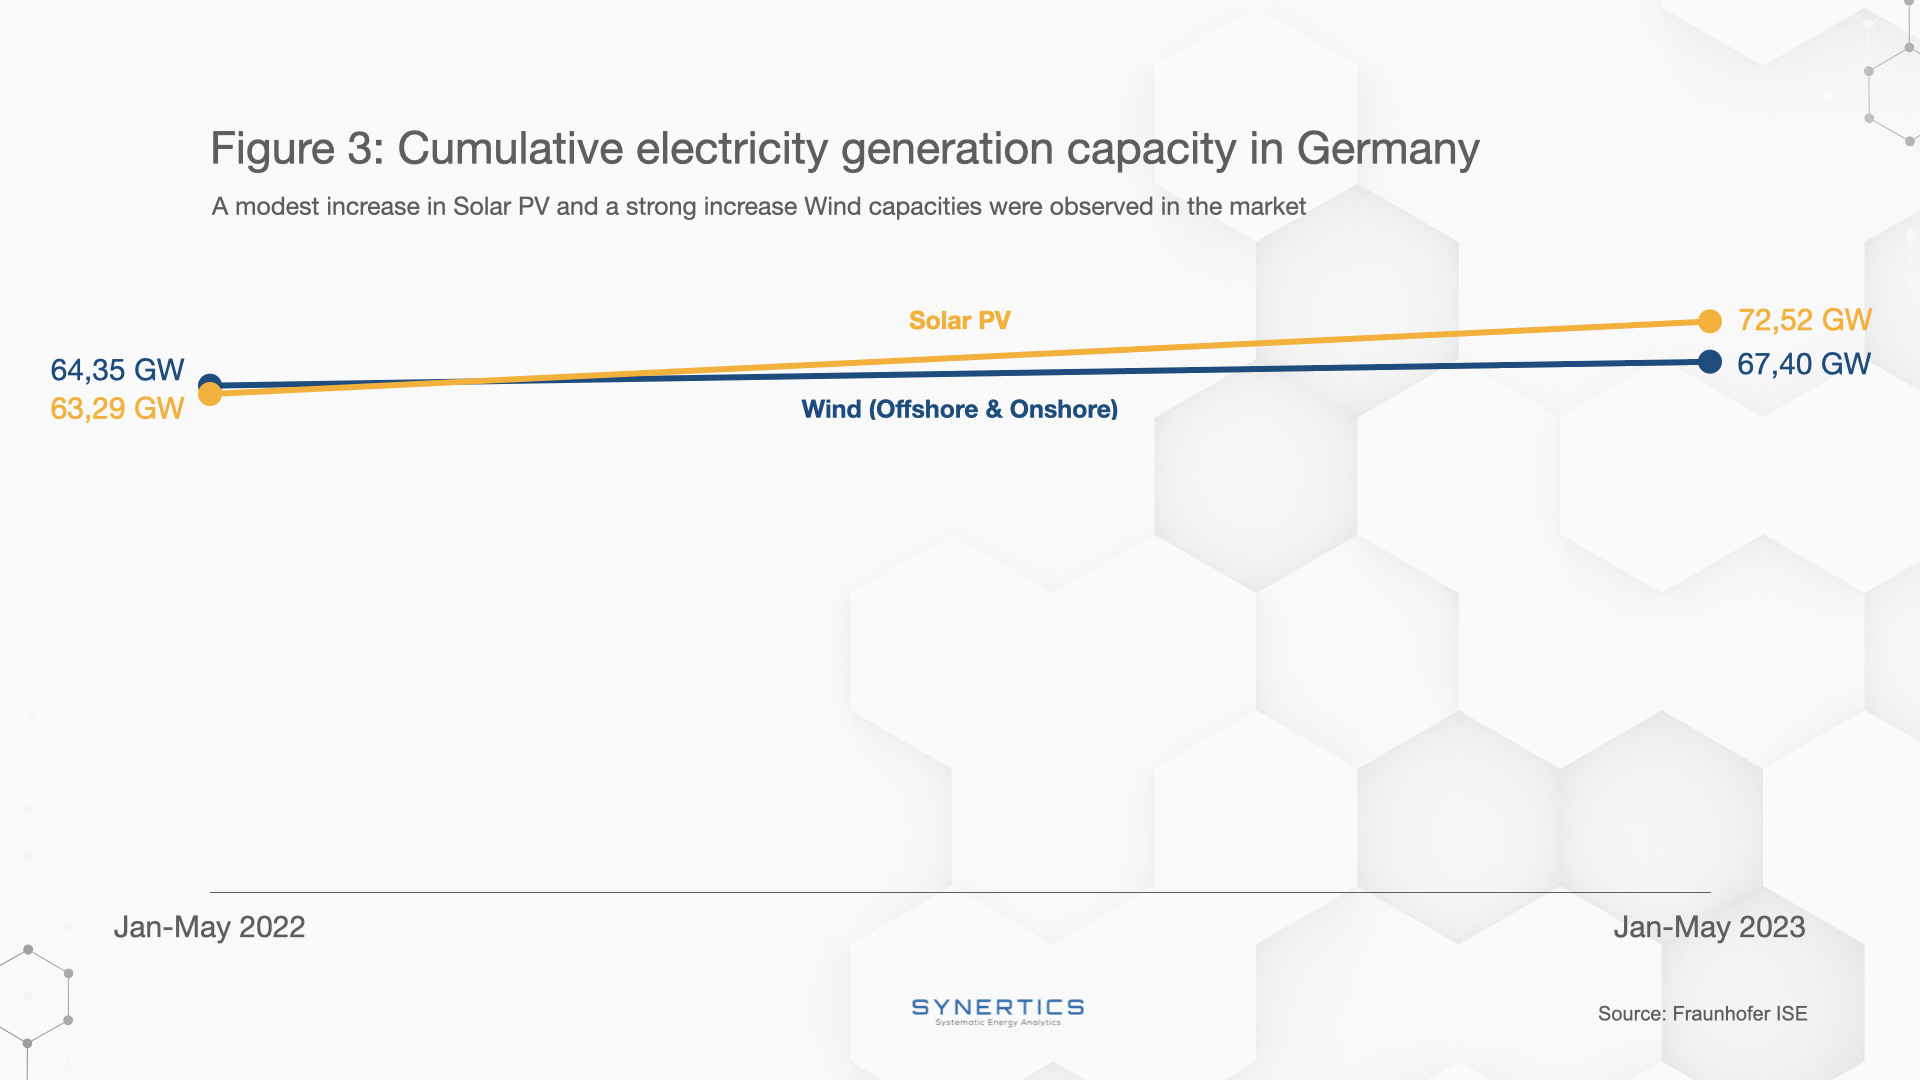 Cumulative electricity generation capacity in Germany